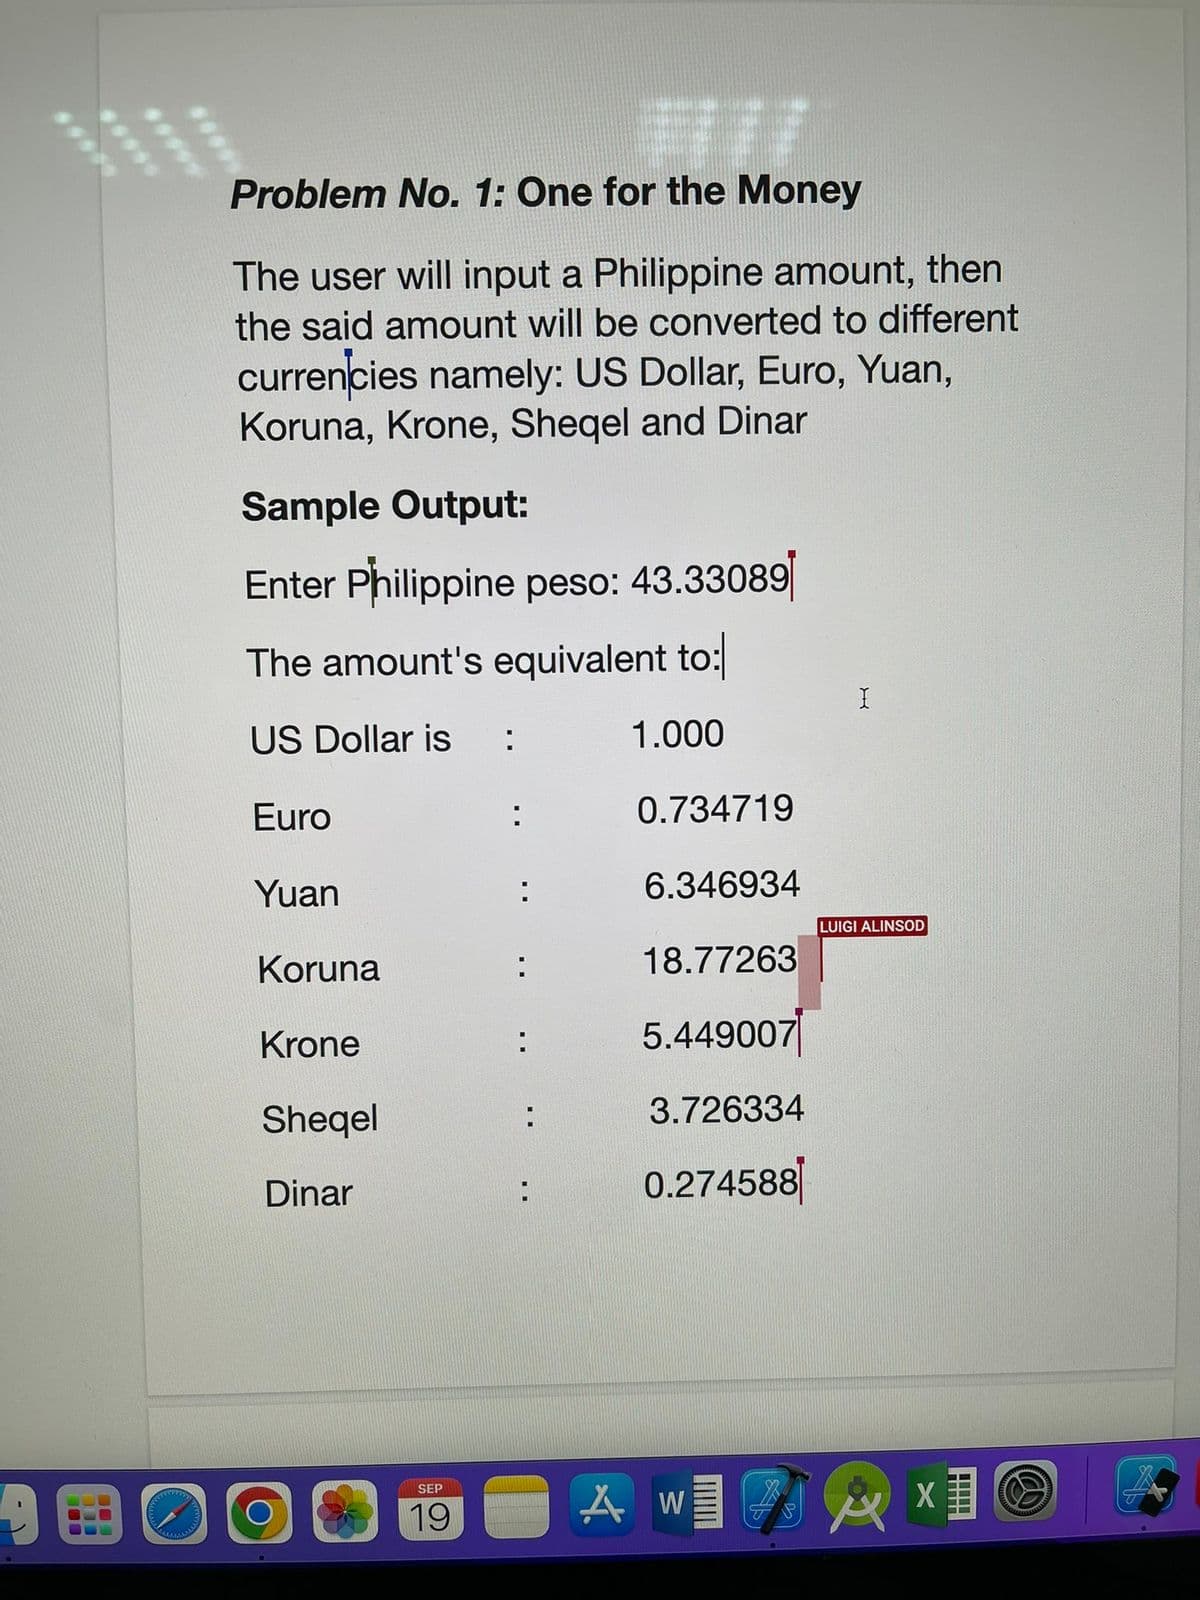 Problem No. 1: One for the Money
The user will input a Philippine amount, then
the said amount will be converted to different
currencies namely: US Dollar, Euro, Yuan,
Koruna, Krone, Sheqel and Dinar
Sample Output:
Enter Philippine peso: 43.33089
The amount's equivalent to:
US Dollar is :
1.000
Euro
Yuan
Koruna
Krone
Sheqel
Dinar
SEP
19
:
:
:
:
:
0.734719
6.346934
18.77263
5.449007
3.726334
0.274588
AW
TP
X
LUIGI ALINSOD
X